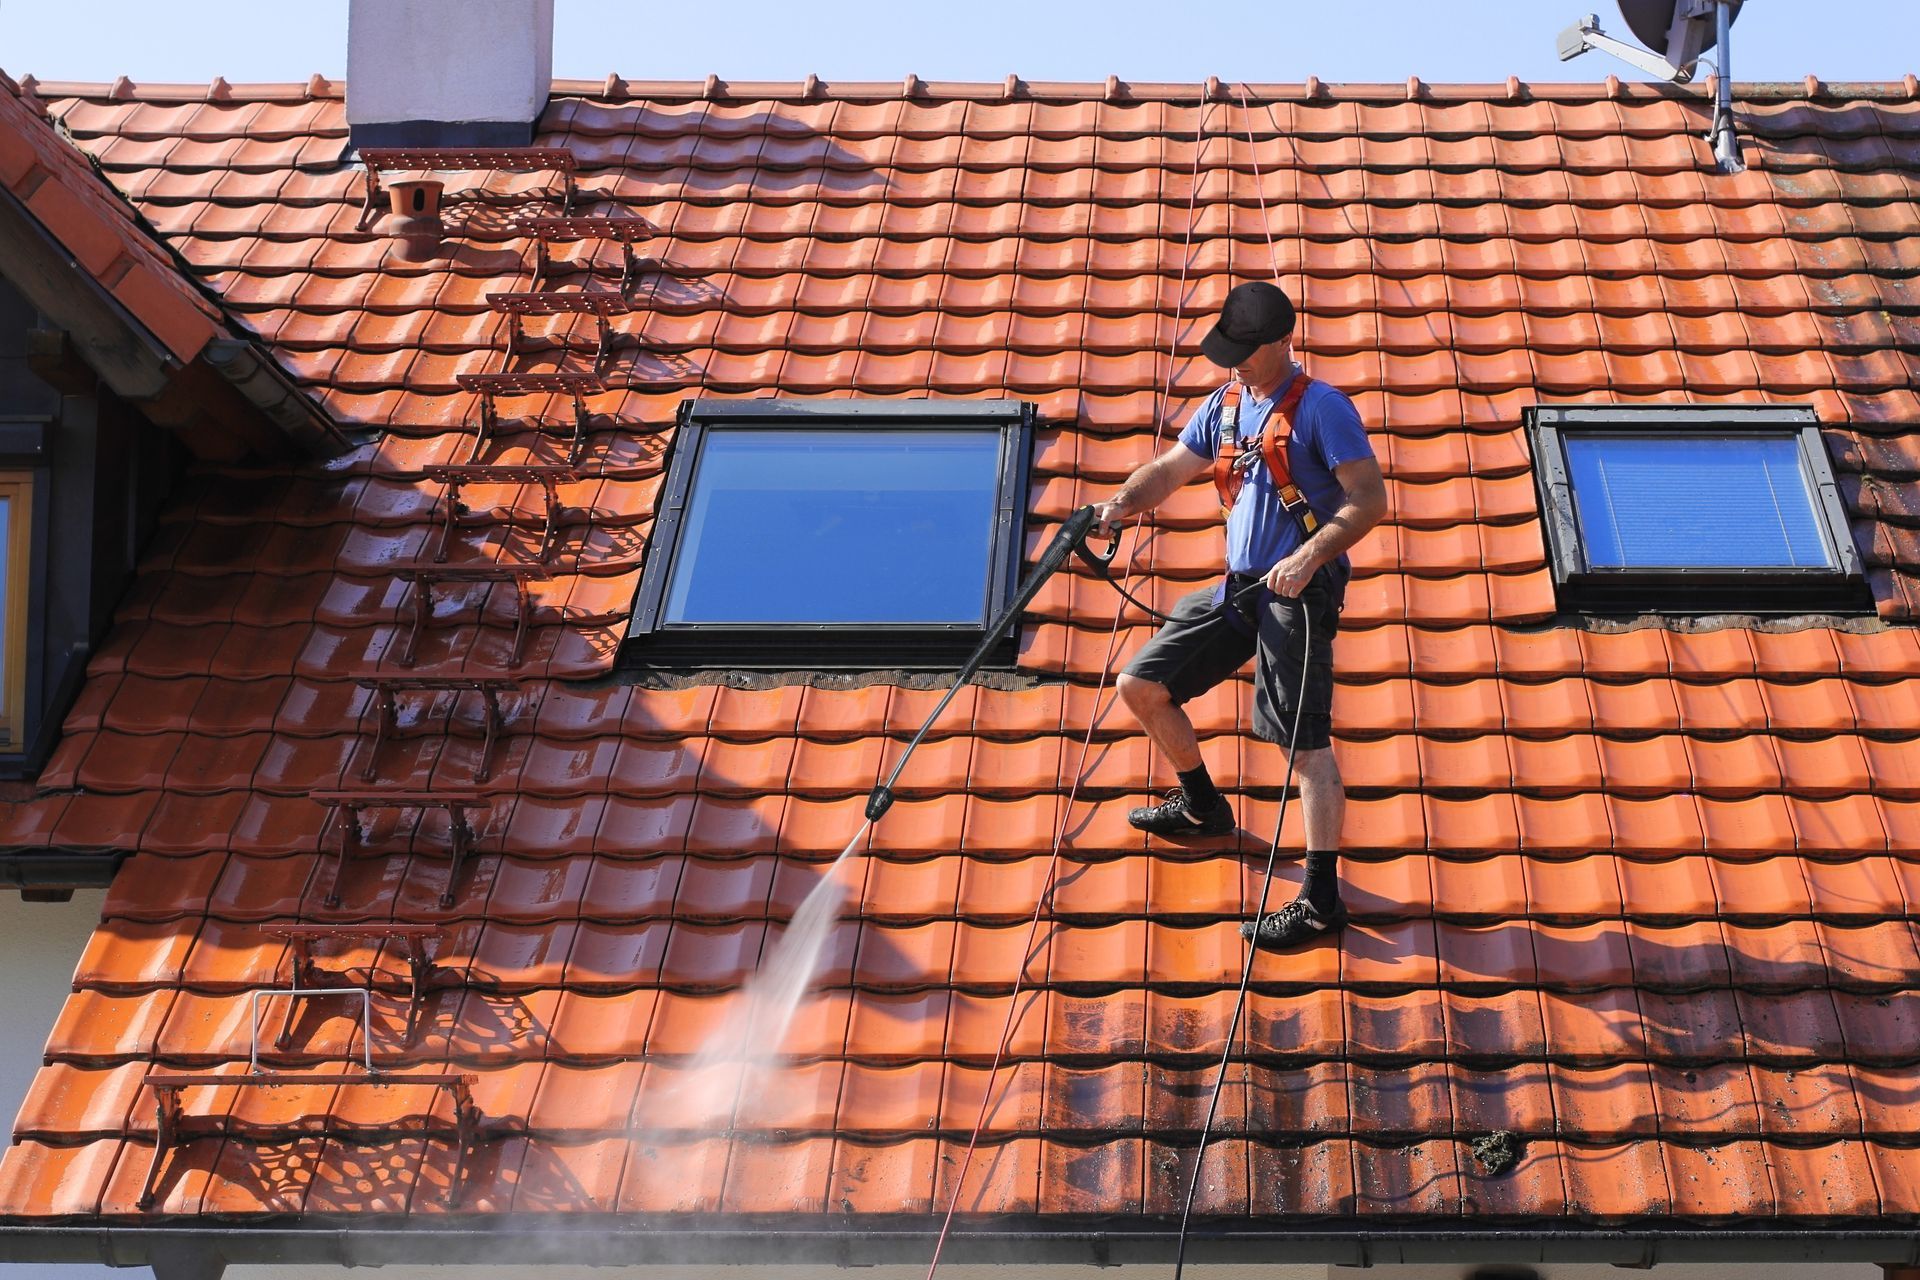 Cleaning the Roof of the House